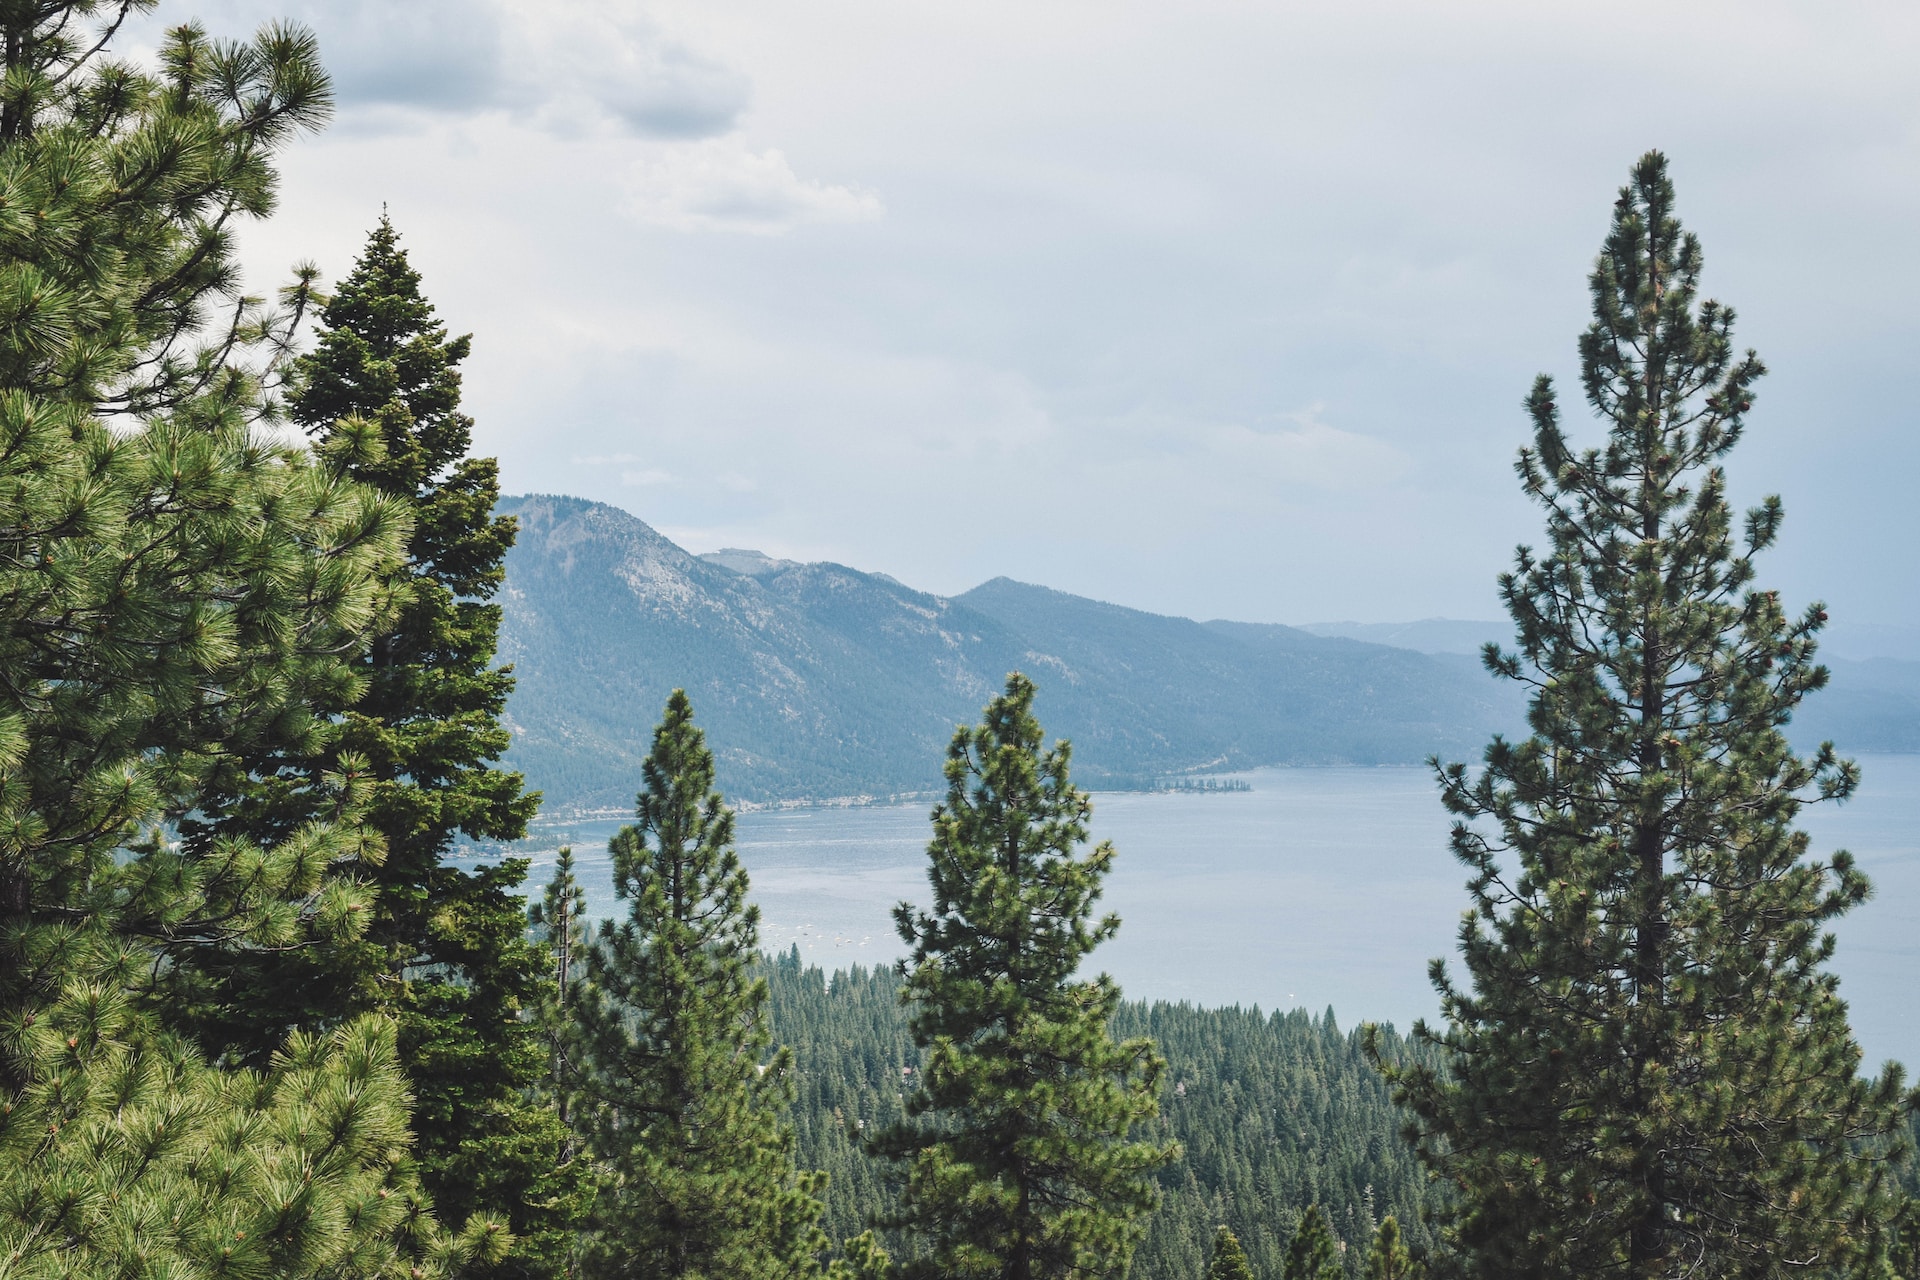 A pine forest in Lake Tahoe.